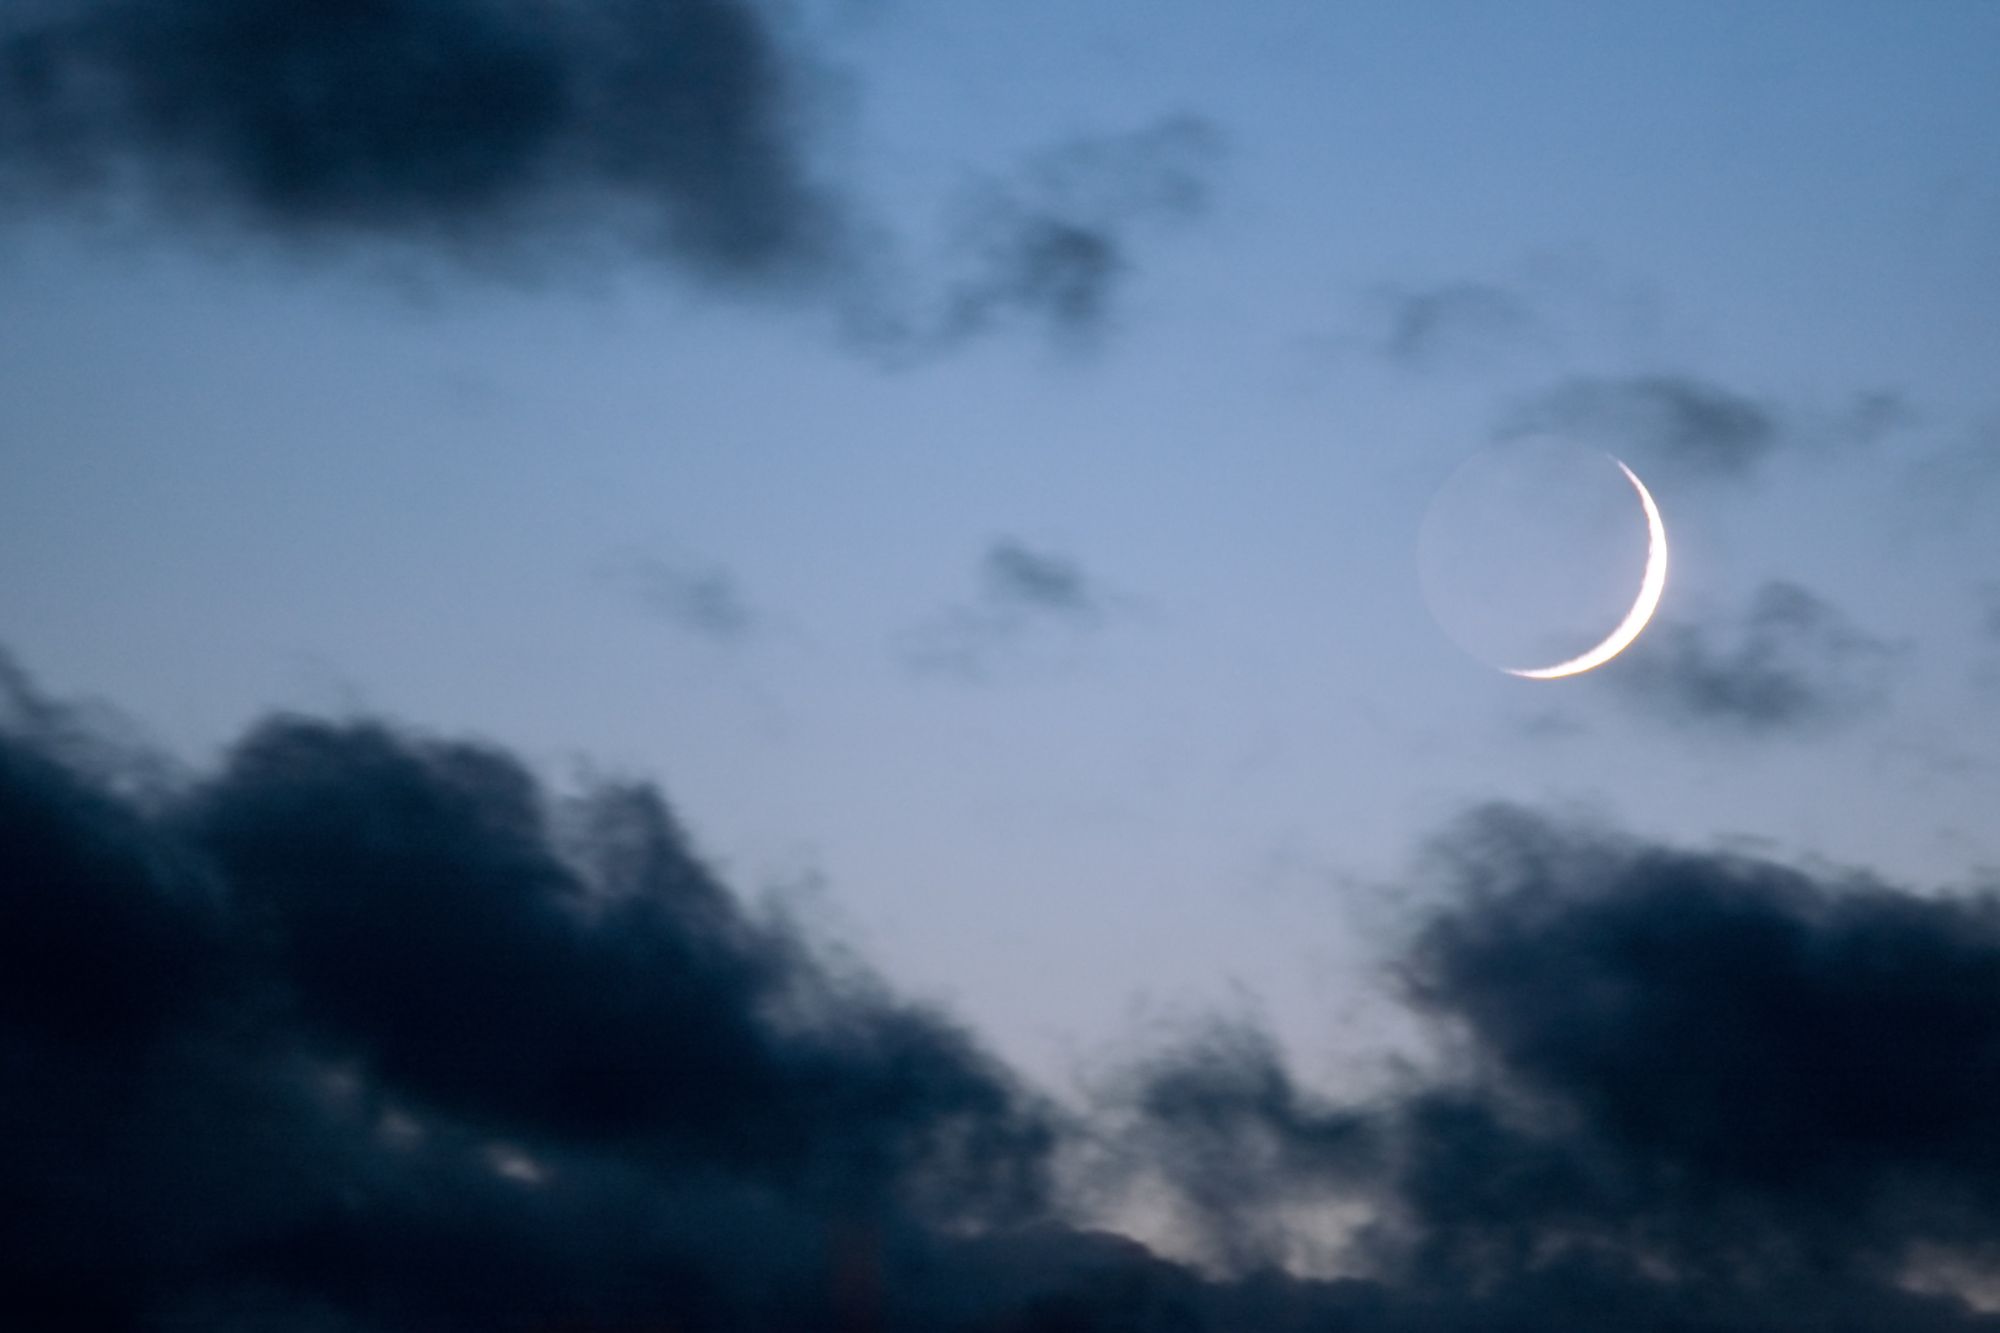 New Moon in the night sky